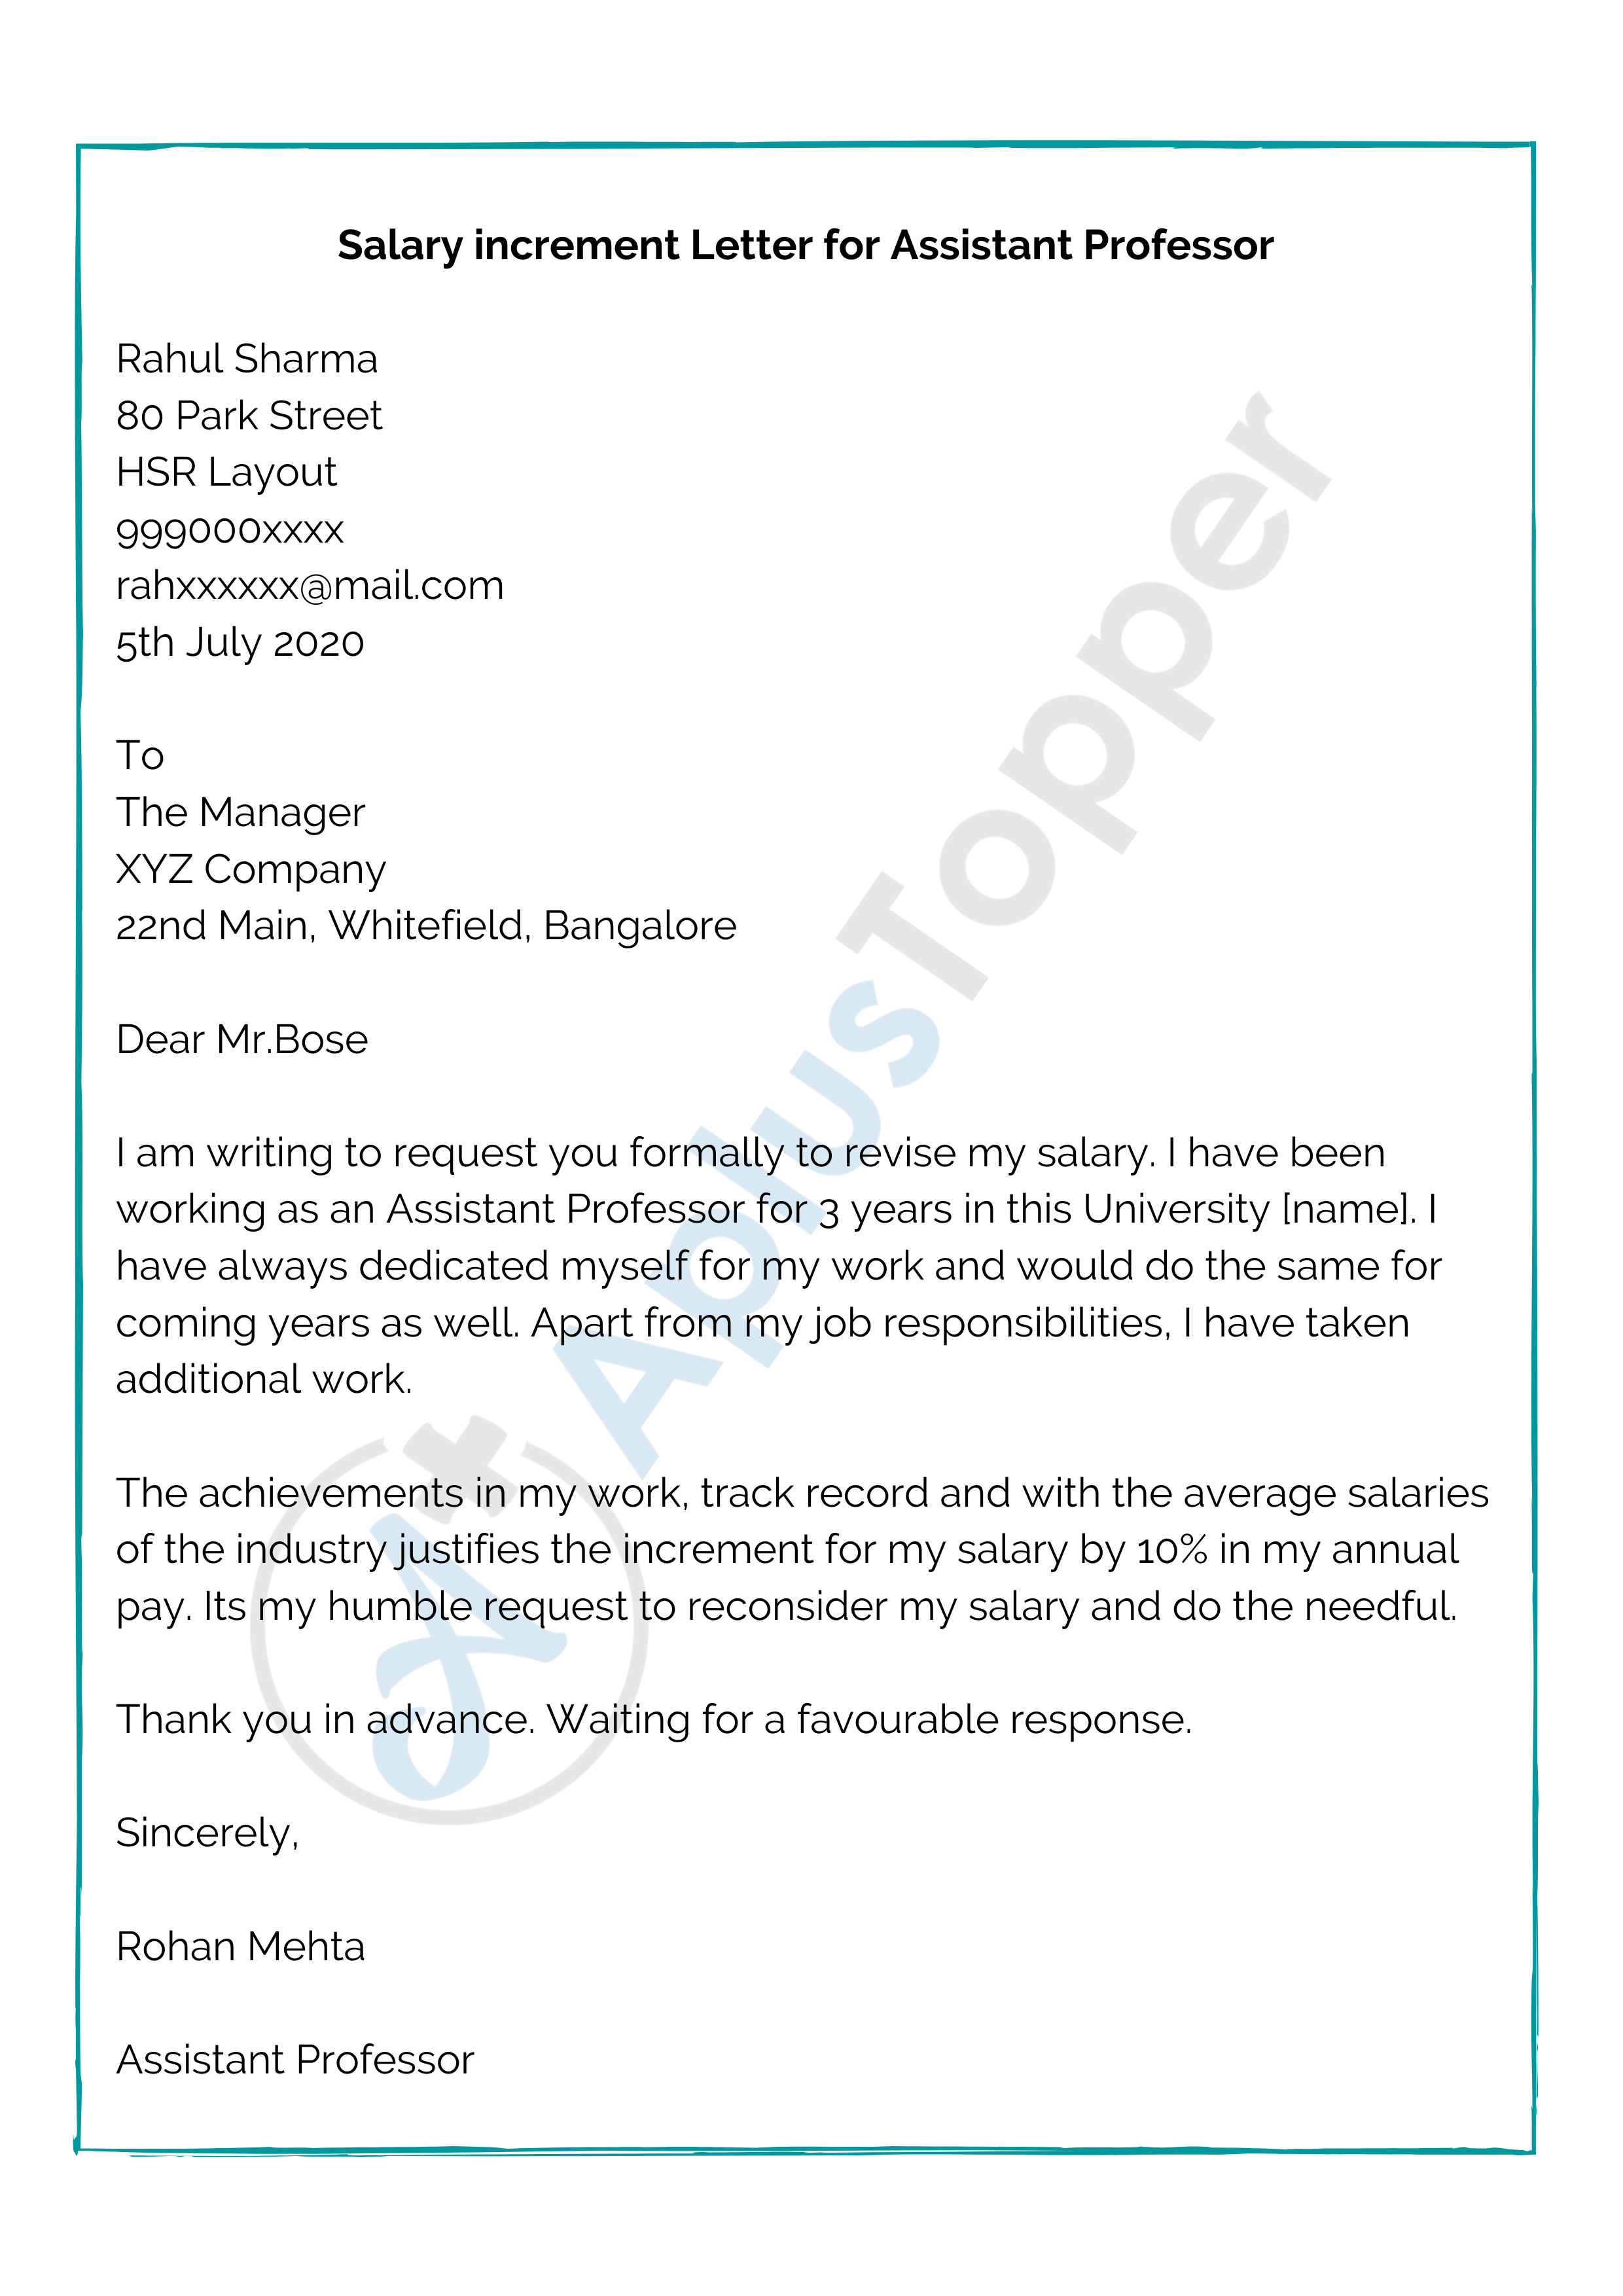 Salary Increment Letter  Format, Samples, How To Write Salary